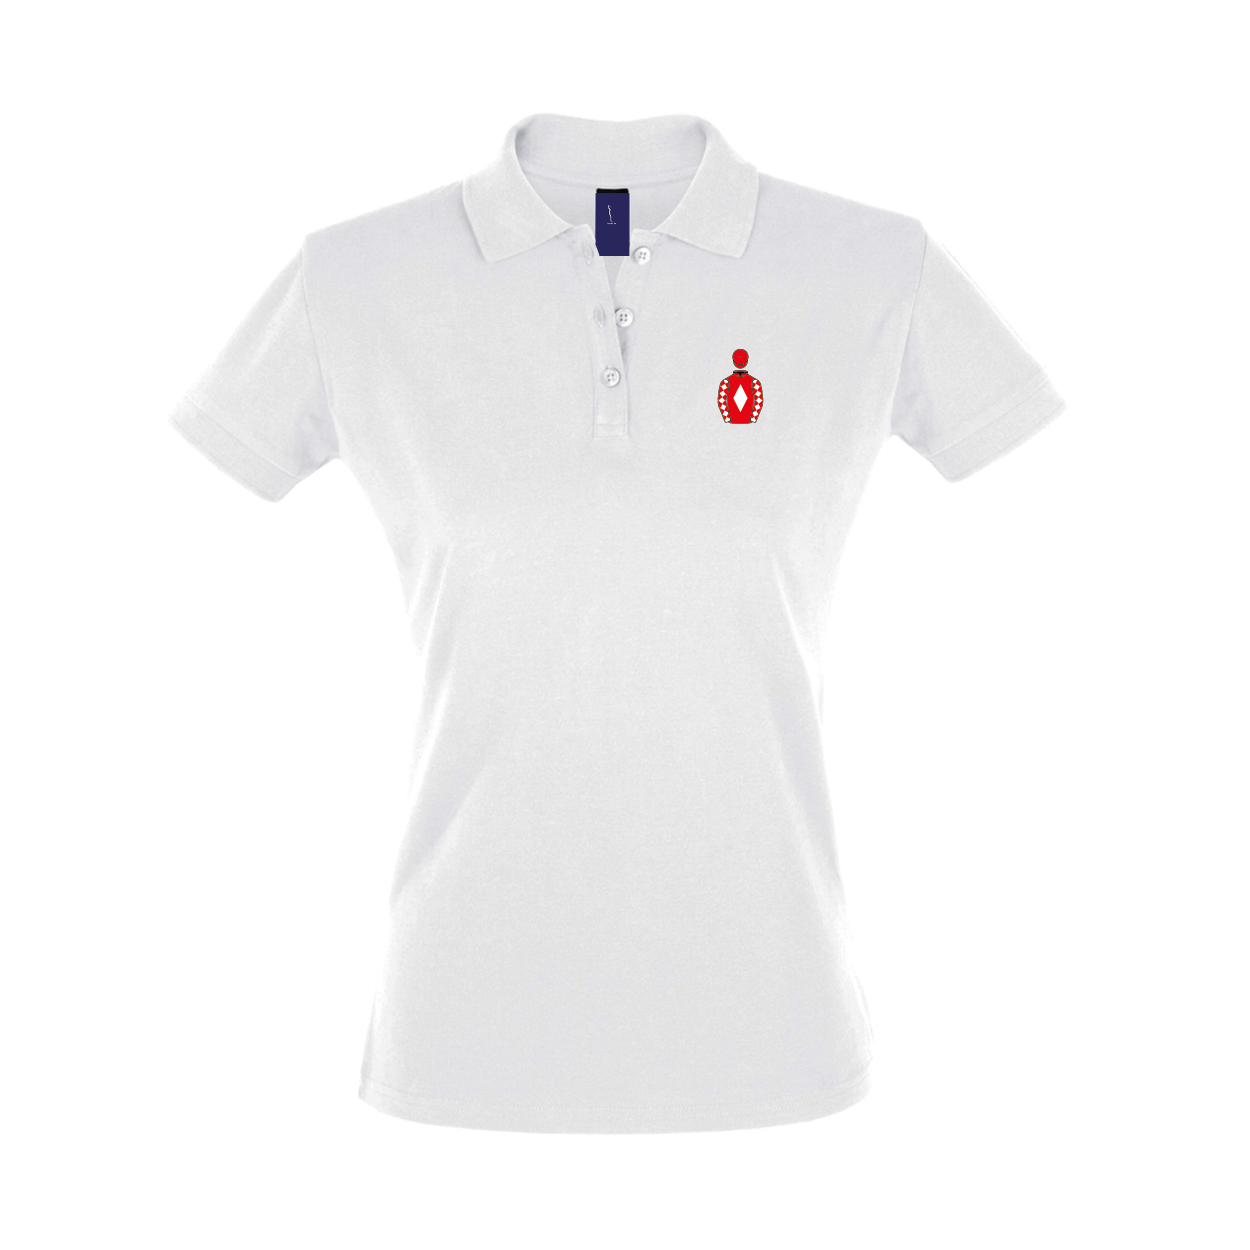 Ladies Caldwell Construction Ltd Embroidered Polo Shirt - Clothing - Hacked Up